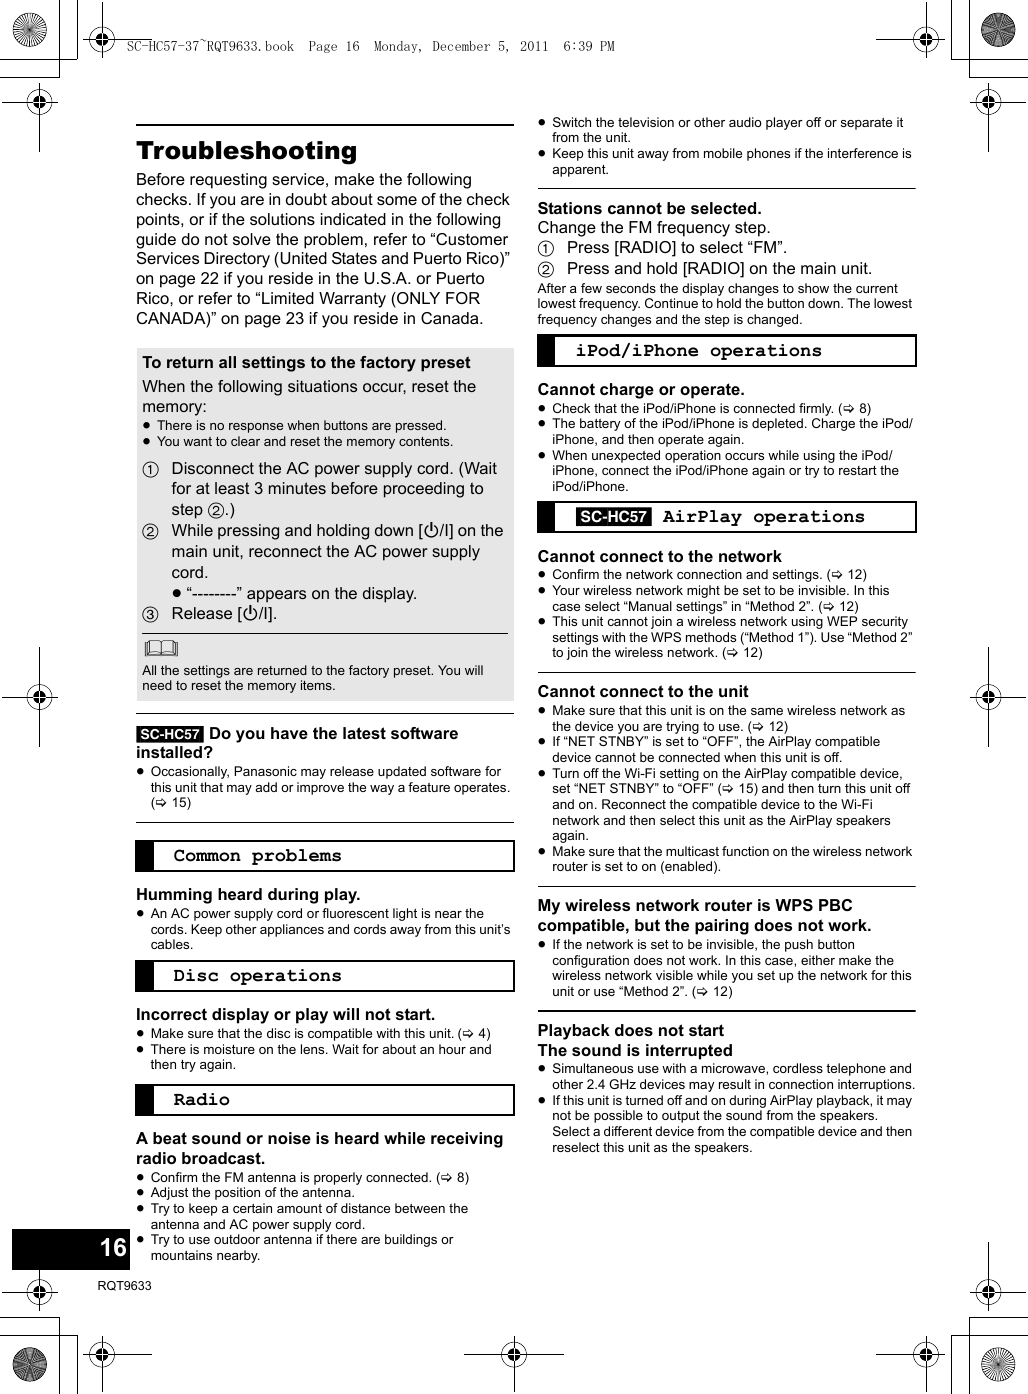 16RQT9633TroubleshootingBefore requesting service, make the following checks. If you are in doubt about some of the check points, or if the solutions indicated in the following guide do not solve the problem, refer to “Customer Services Directory (United States and Puerto Rico)” on page 22 if you reside in the U.S.A. or Puerto Rico, or refer to “Limited Warranty (ONLY FOR CANADA)” on page 23 if you reside in Canada.[SC-HC57] Do you have the latest software installed?≥Occasionally, Panasonic may release updated software for this unit that may add or improve the way a feature operates. (&gt;15)Humming heard during play.≥An AC power supply cord or fluorescent light is near the cords. Keep other appliances and cords away from this unit’s cables.Incorrect display or play will not start.≥Make sure that the disc is compatible with this unit.(&gt;4)≥There is moisture on the lens. Wait for about an hour and then try again.A beat sound or noise is heard while receiving radio broadcast.≥Confirm the FM antenna is properly connected. (&gt;8)≥Adjust the position of the antenna.≥Try to keep a certain amount of distance between the antenna and AC power supply cord.≥Try to use outdoor antenna if there are buildings or mountains nearby.≥Switch the television or other audio player off or separate it from the unit.≥Keep this unit away from mobile phones if the interference is apparent.Stations cannot be selected.Change the FM frequency step.1Press [RADIO] to select “FM”.2Press and hold [RADIO] on the main unit.After a few seconds the display changes to show the current lowest frequency. Continue to hold the button down. The lowest frequency changes and the step is changed.Cannot charge or operate.≥Check that the iPod/iPhone is connected firmly. (&gt;8)≥The battery of the iPod/iPhone is depleted. Charge the iPod/iPhone, and then operate again.≥When unexpected operation occurs while using the iPod/iPhone, connect the iPod/iPhone again or try to restart the iPod/iPhone.Cannot connect to the network≥Confirm the network connection and settings. (&gt;12)≥Your wireless network might be set to be invisible. In this case select “Manual settings” in “Method 2”. (&gt;12)≥This unit cannot join a wireless network using WEP security settings with the WPS methods (“Method 1”). Use “Method 2” to join the wireless network. (&gt;12)Cannot connect to the unit≥Make sure that this unit is on the same wireless network as the device you are trying to use. (&gt;12)≥If “NET STNBY” is set to “OFF”, the AirPlay compatible device cannot be connected when this unit is off.≥Turn off the Wi-Fi setting on the AirPlay compatible device, set “NET STNBY” to “OFF” (&gt;15) and then turn this unit off and on. Reconnect the compatible device to the Wi-Fi network and then select this unit as the AirPlay speakers again.≥Make sure that the multicast function on the wireless network router is set to on (enabled).My wireless network router is WPS PBC compatible, but the pairing does not work.≥If the network is set to be invisible, the push button configuration does not work. In this case, either make the wireless network visible while you set up the network for this unit or use “Method 2”. (&gt;12)Playback does not startThe sound is interrupted≥Simultaneous use with a microwave, cordless telephone and other 2.4 GHz devices may result in connection interruptions.≥If this unit is turned off and on during AirPlay playback, it may not be possible to output the sound from the speakers. Select a different device from the compatible device and then reselect this unit as the speakers.To return all settings to the factory presetWhen the following situations occur, reset the memory:≥There is no response when buttons are pressed.≥You want to clear and reset the memory contents.1Disconnect the AC power supply cord. (Wait for at least 3 minutes before proceeding to step 2.)2While pressing and holding down [Í/I] on the main unit, reconnect the AC power supply cord.≥“--------” appears on the display.3Release [Í/I].All the settings are returned to the factory preset. You will need to reset the memory items.Common problemsDisc operationsRadioiPod/iPhone operations[SC-HC57] AirPlay operationsSC-HC57-37~RQT9633.book  Page 16  Monday, December 5, 2011  6:39 PM